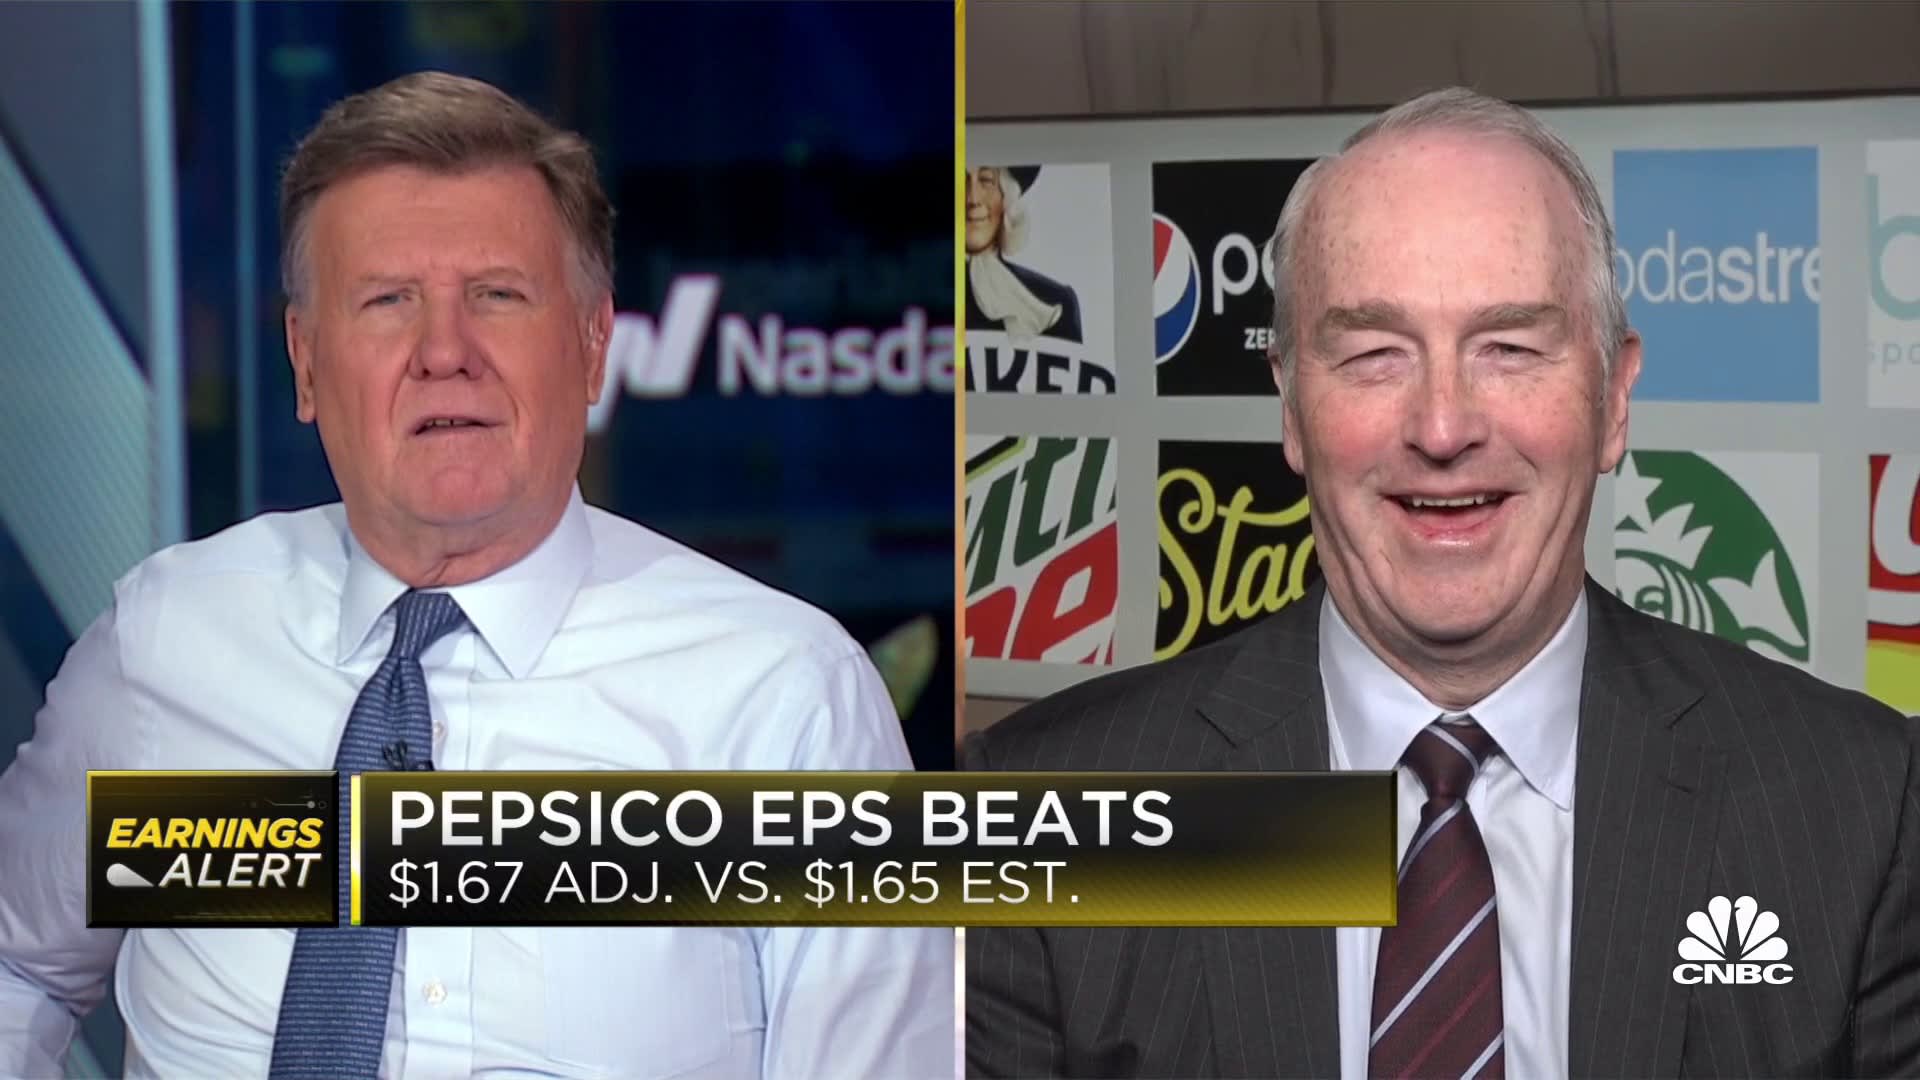 PepsiCo CFO Hugh Johnston: Inflation didn't moderate at all during Q4